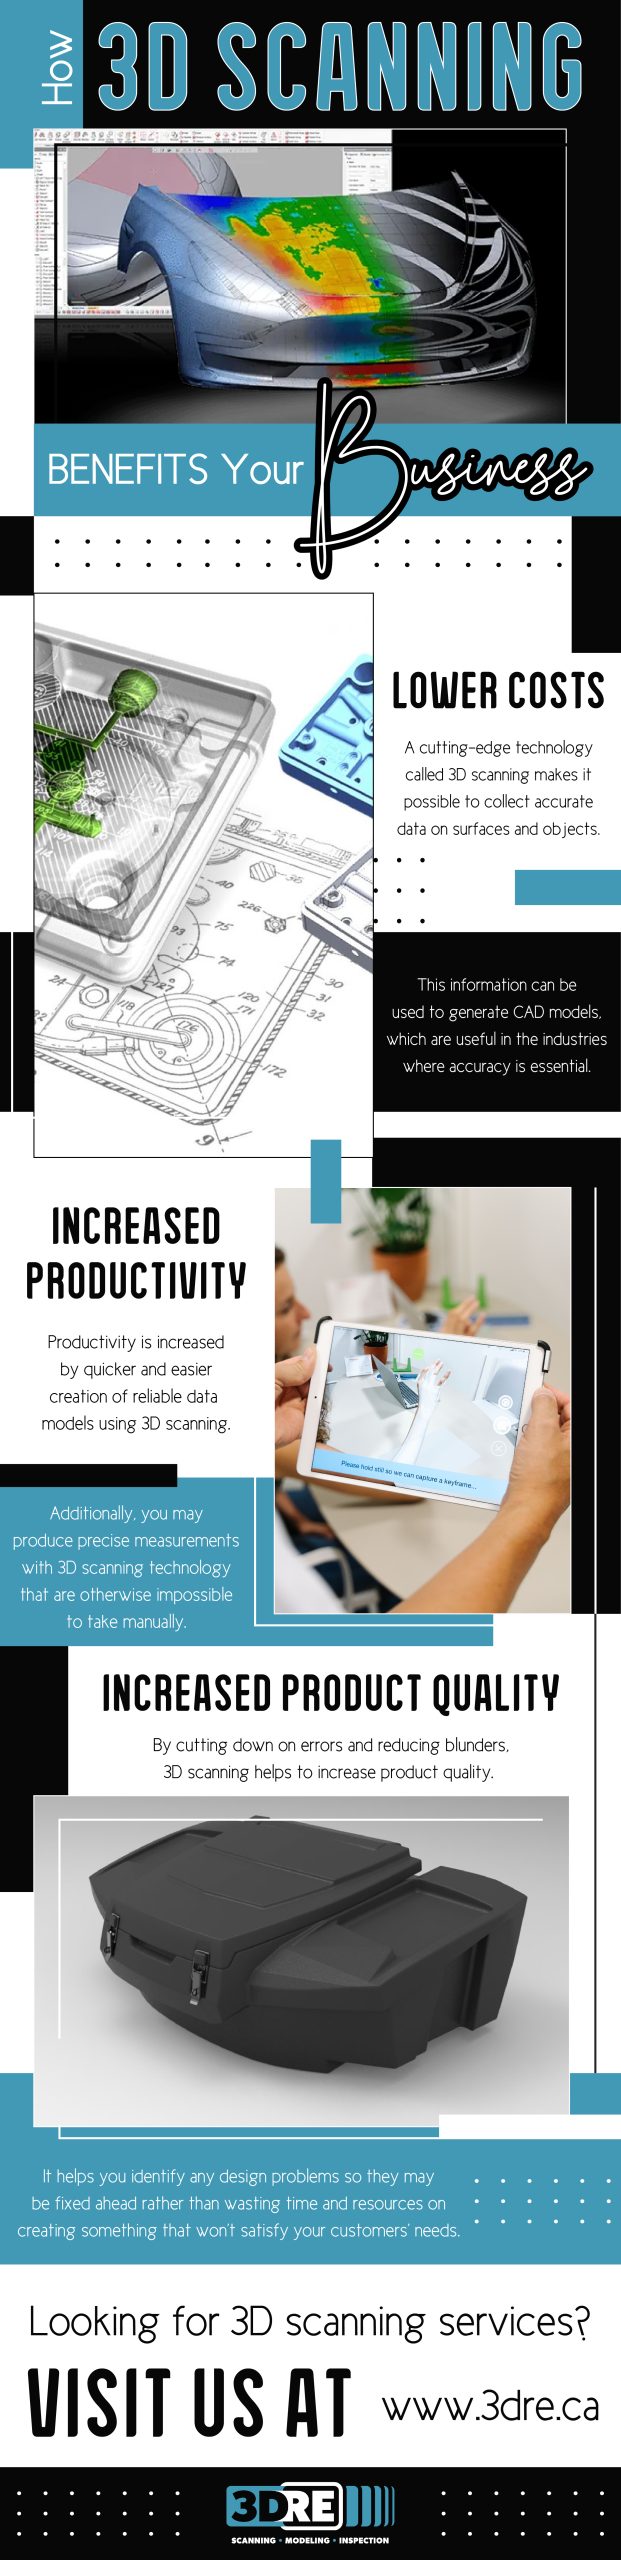 How 3D Scanning Benefits Your Business- Infograph